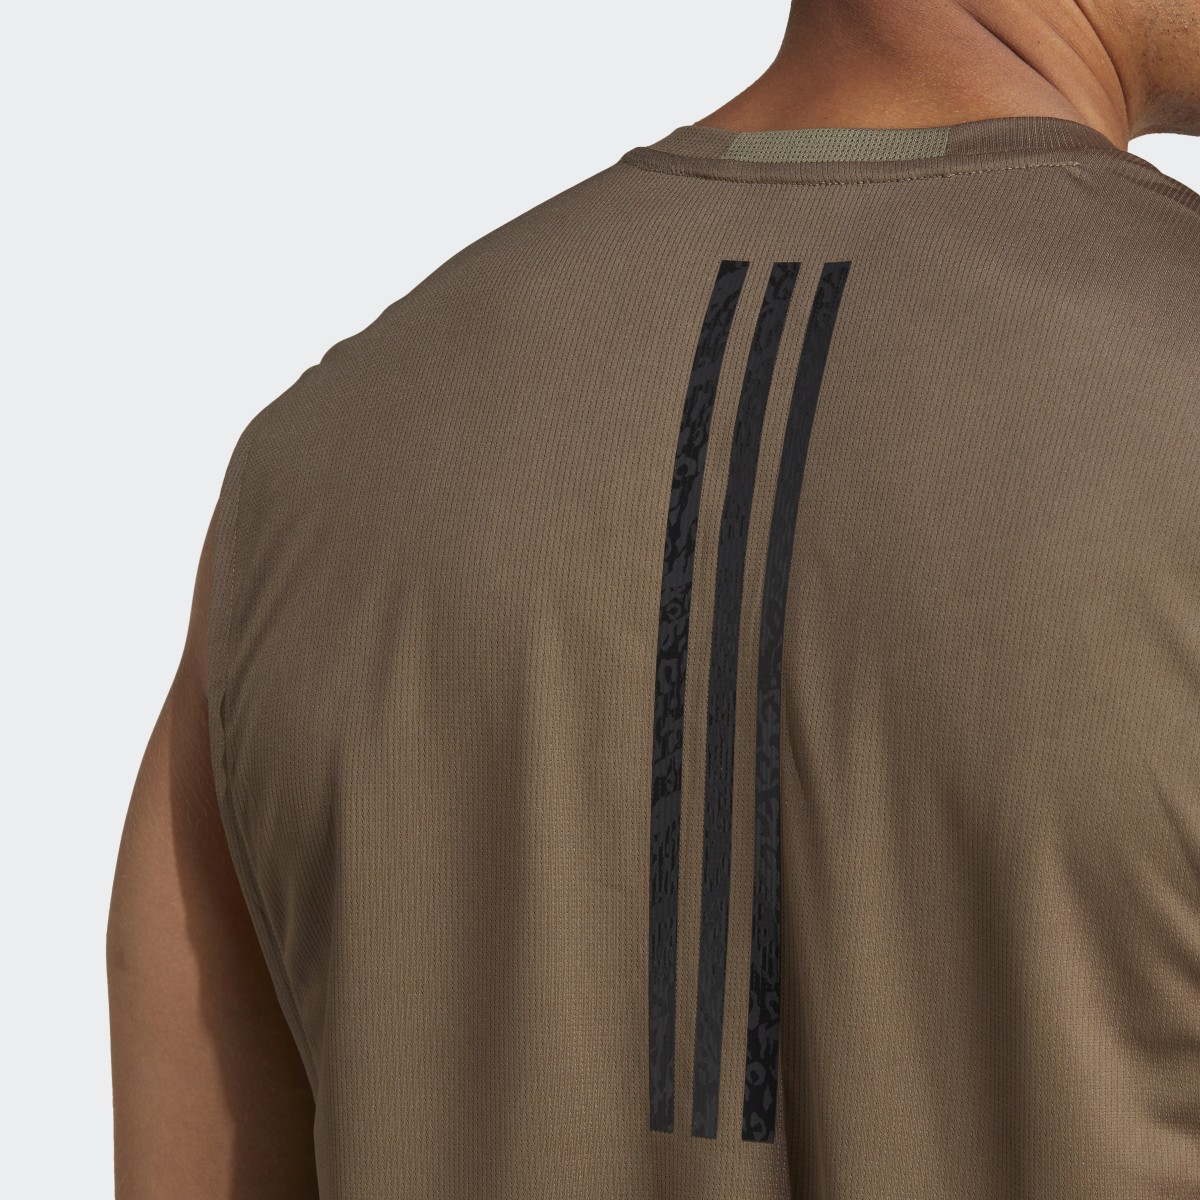 Adidas HIIT Tank Top Curated By Cody Rigsby. 7